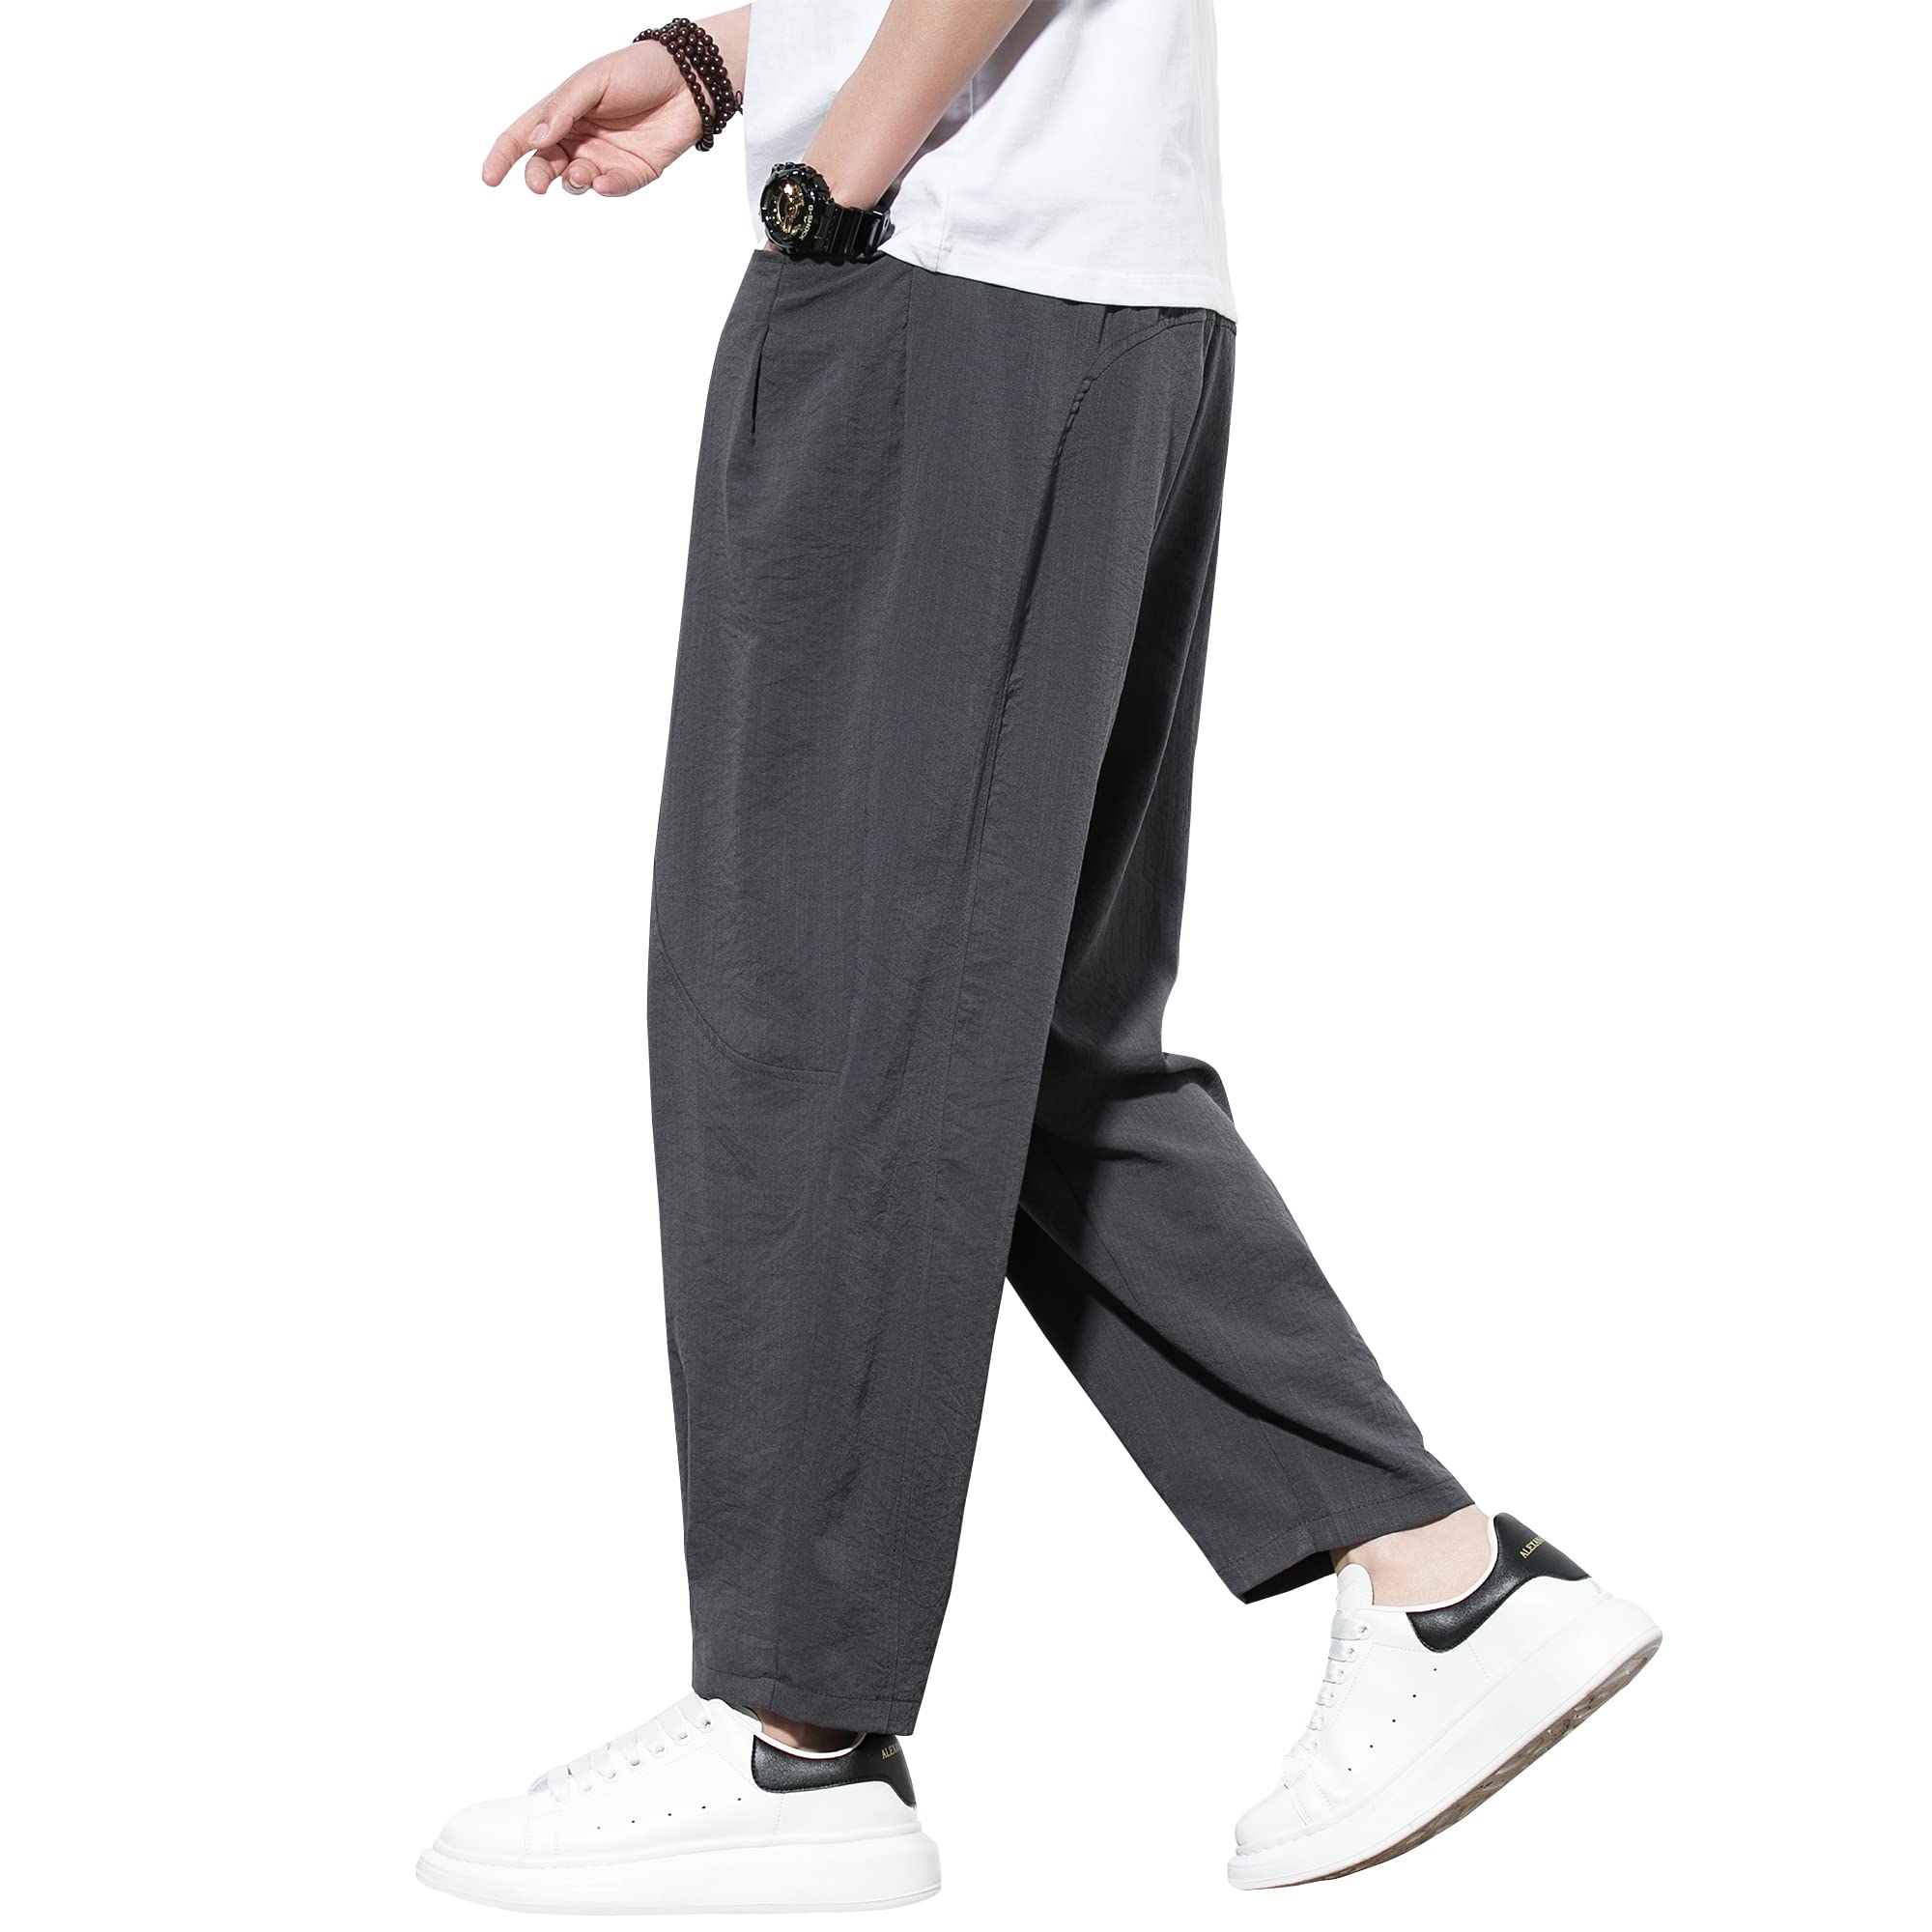 Hot Men Summer New Casual Fashion Harem Pants Loose Ankle Length Trousers  Turnip Trousers Hairstylist Costumes Plus Size Pants - AliExpress